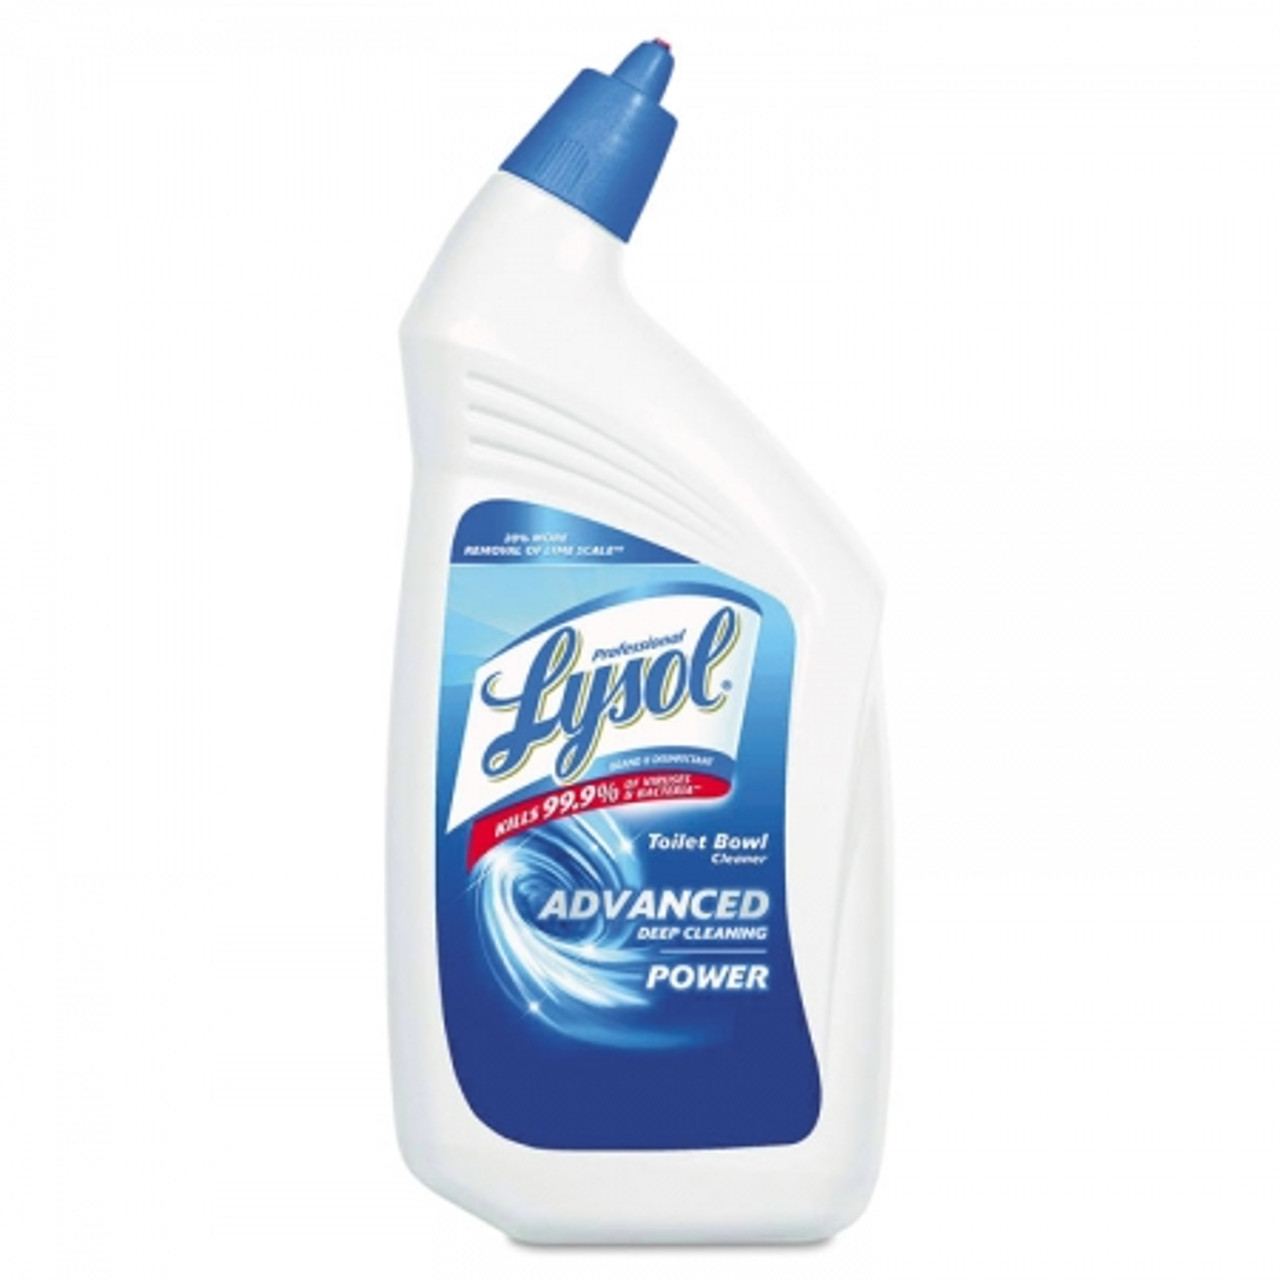 Sultan Professional Lysol Brand Disinfectant Cleaner Disinfectant Toilet Bowl, 32 oz